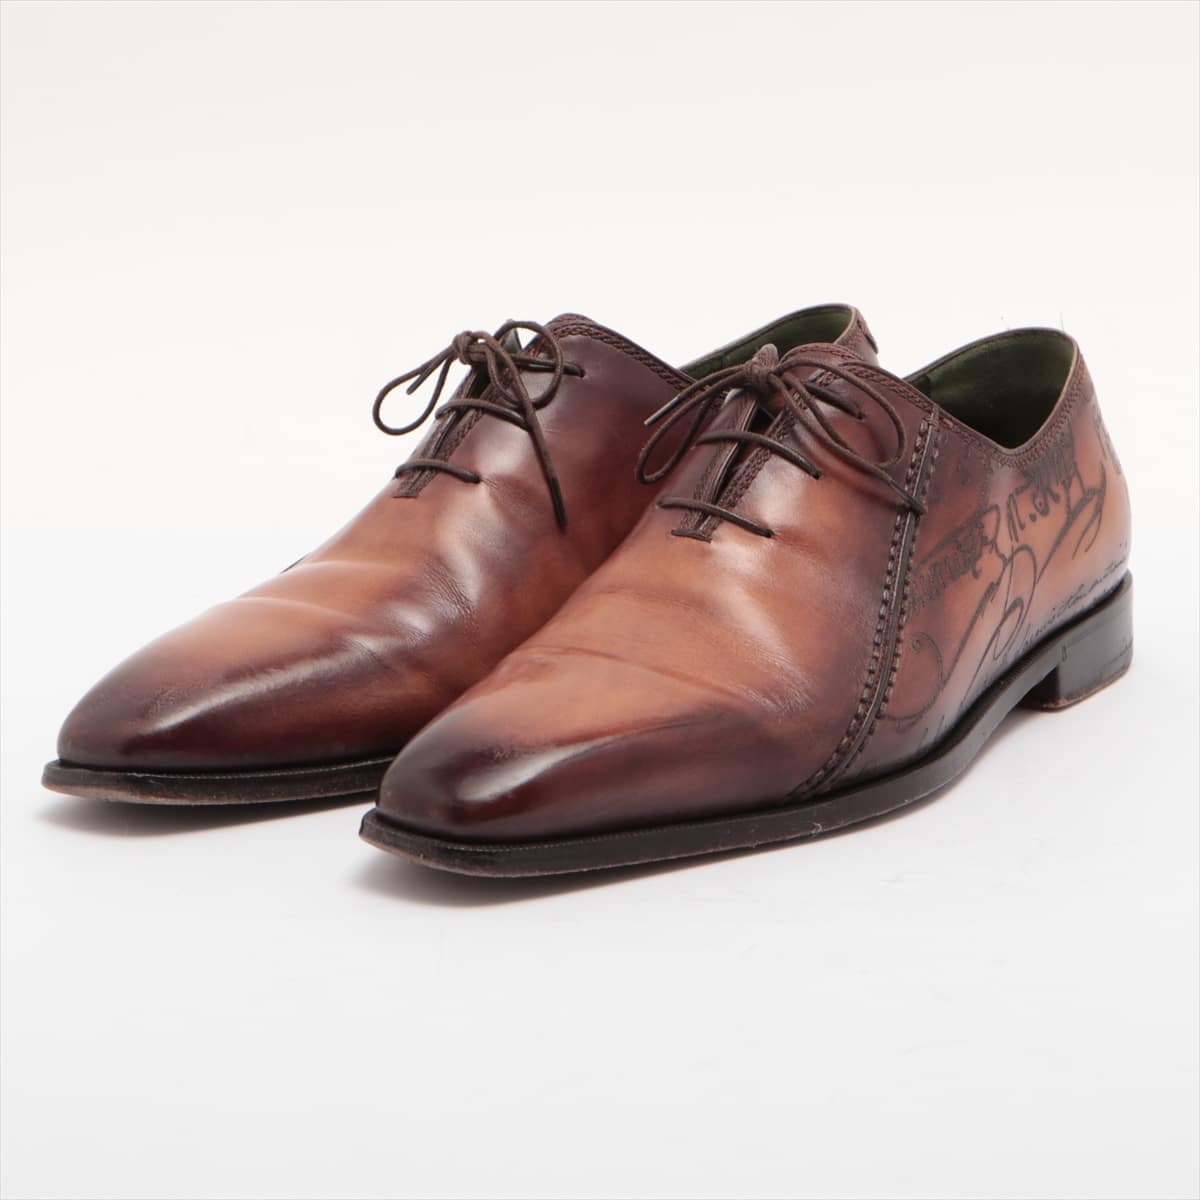 Berluti Scars Leather Leather shoes 9 Men's Brown